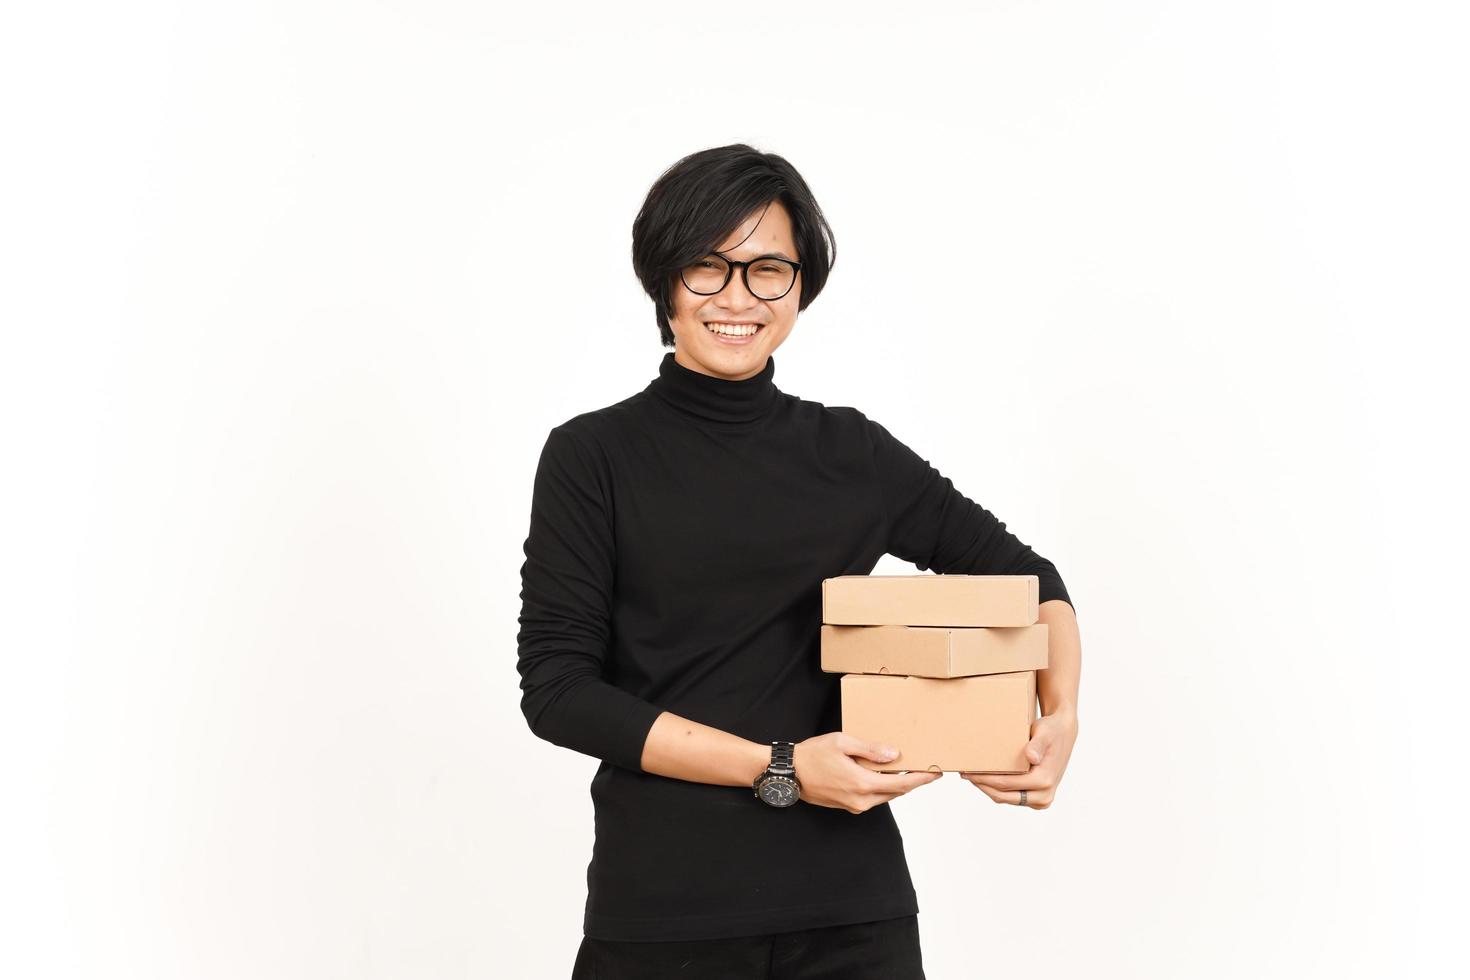 Holding Package Box or Cardboard Box Of Handsome Asian Man Isolated On White Background photo